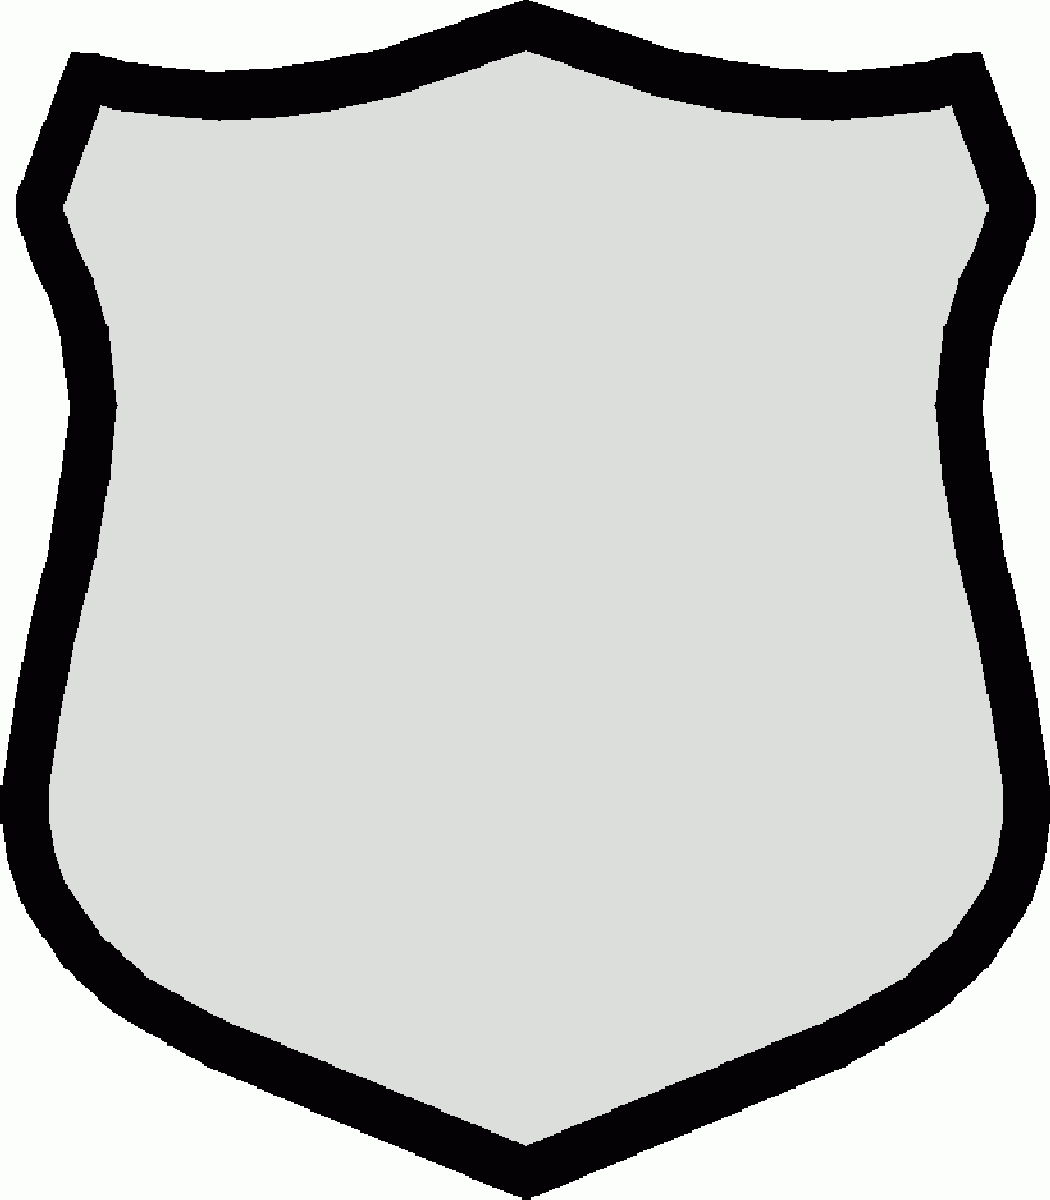 Shield Template Clipart | Free Download Best Shield Template Regarding Blank Shield Template Printable